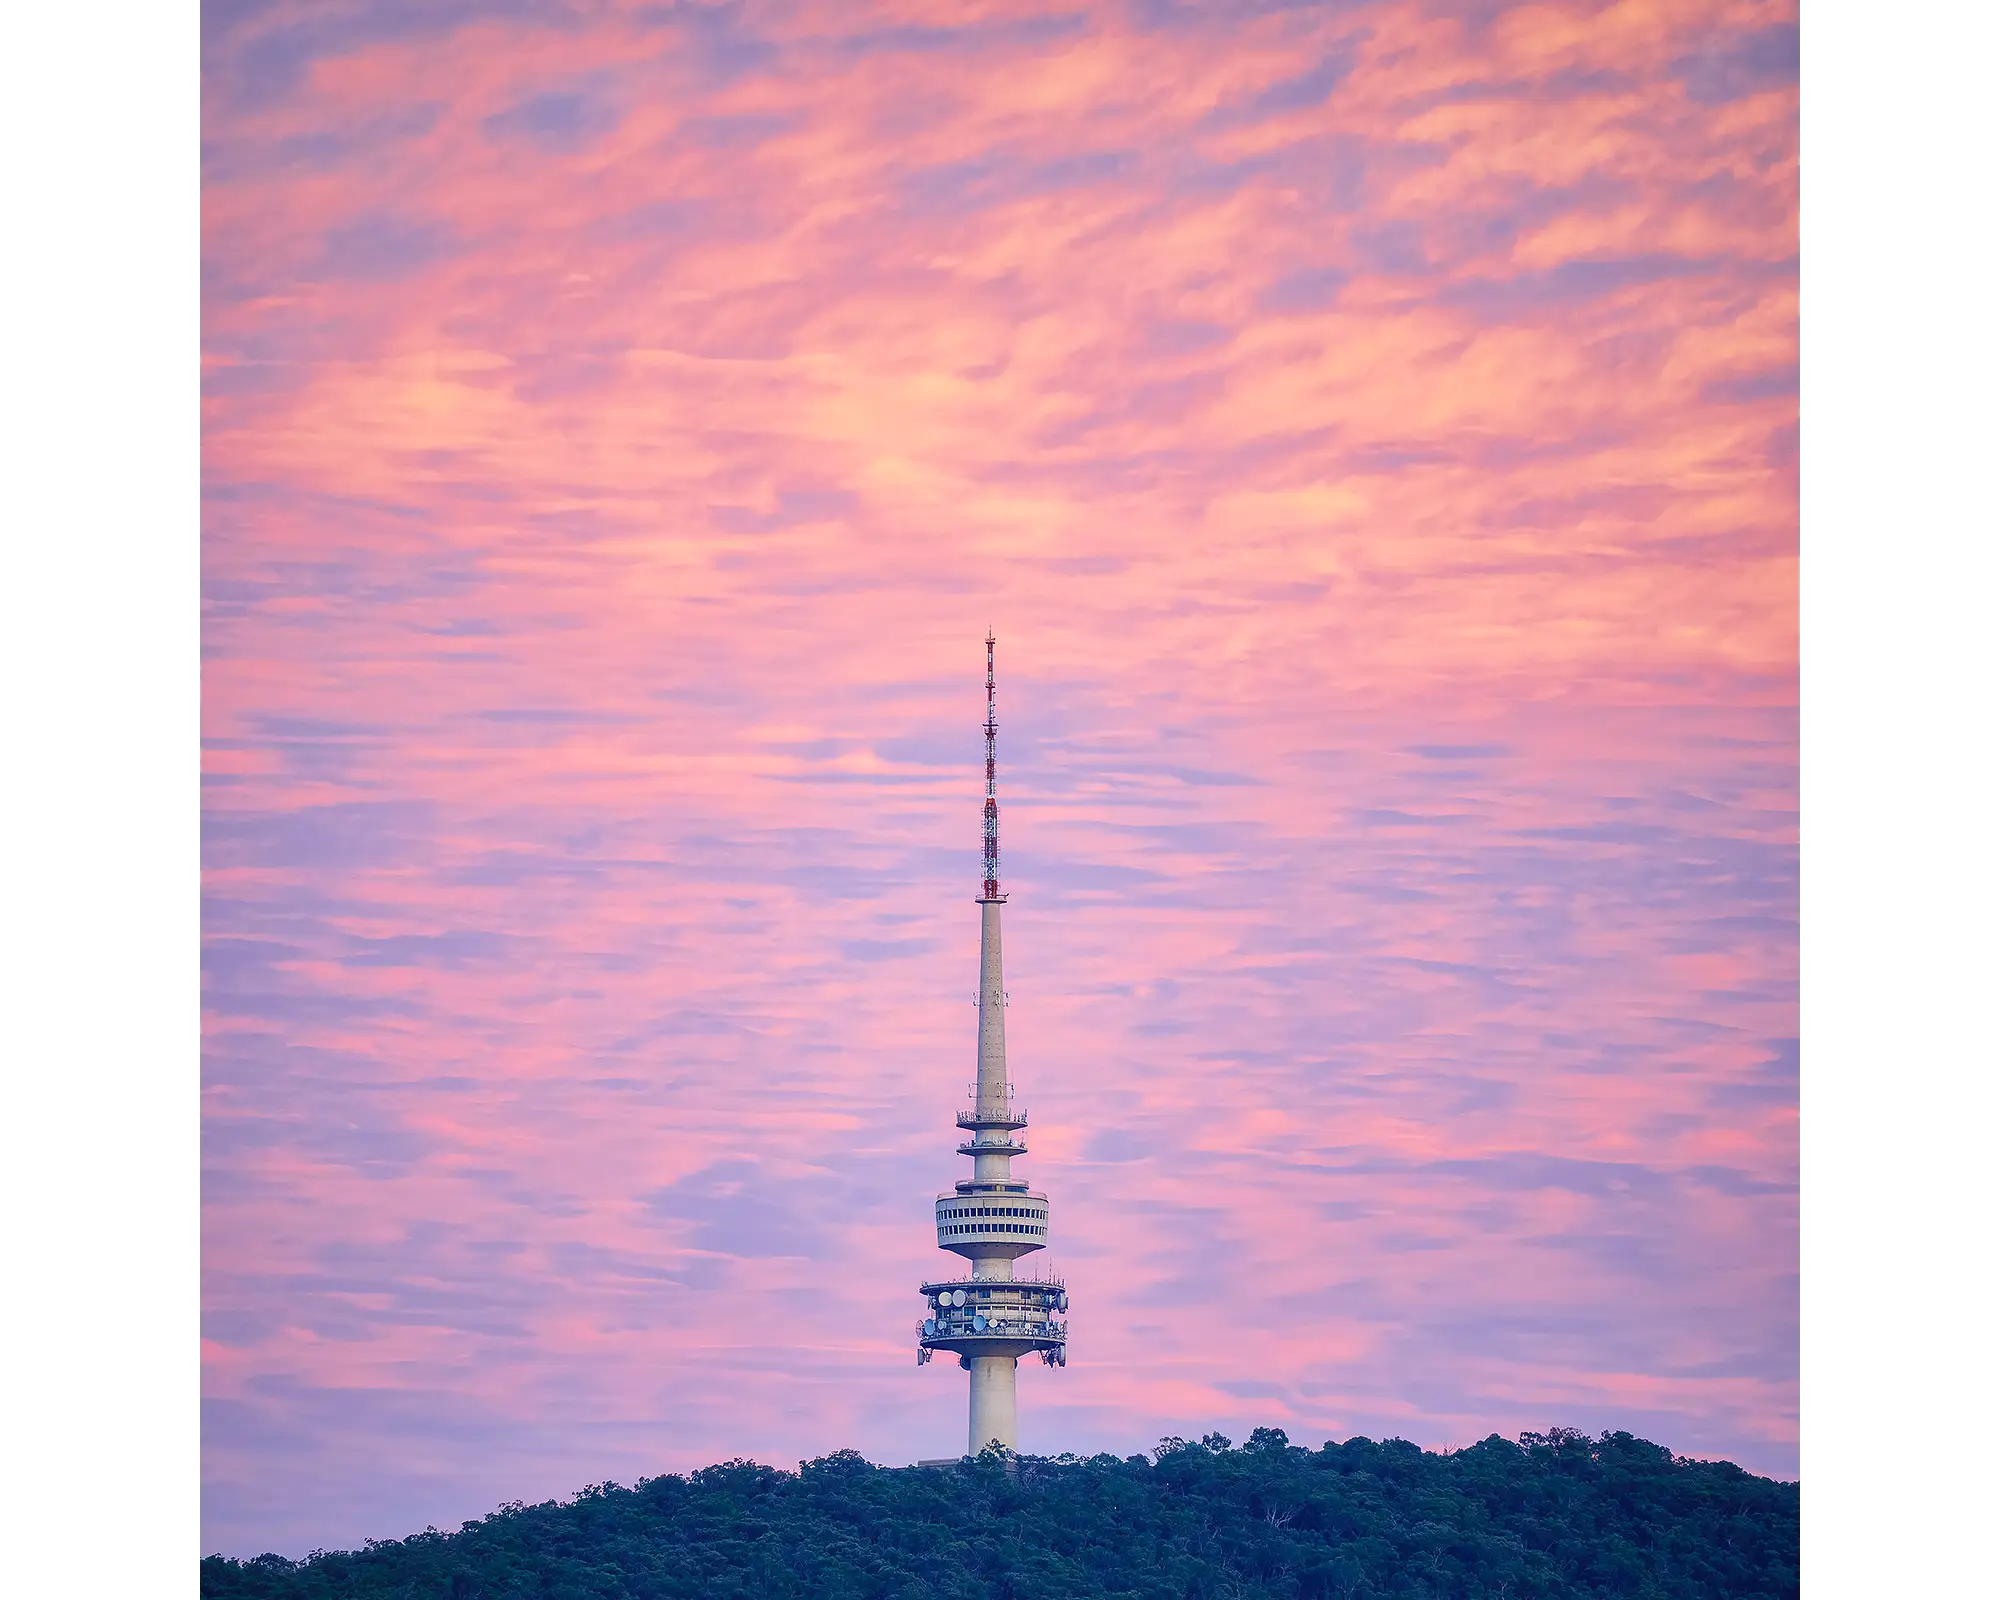 Pink sky at sunrise with Telstra Tower and Black Mountain, Canberra, Australia.